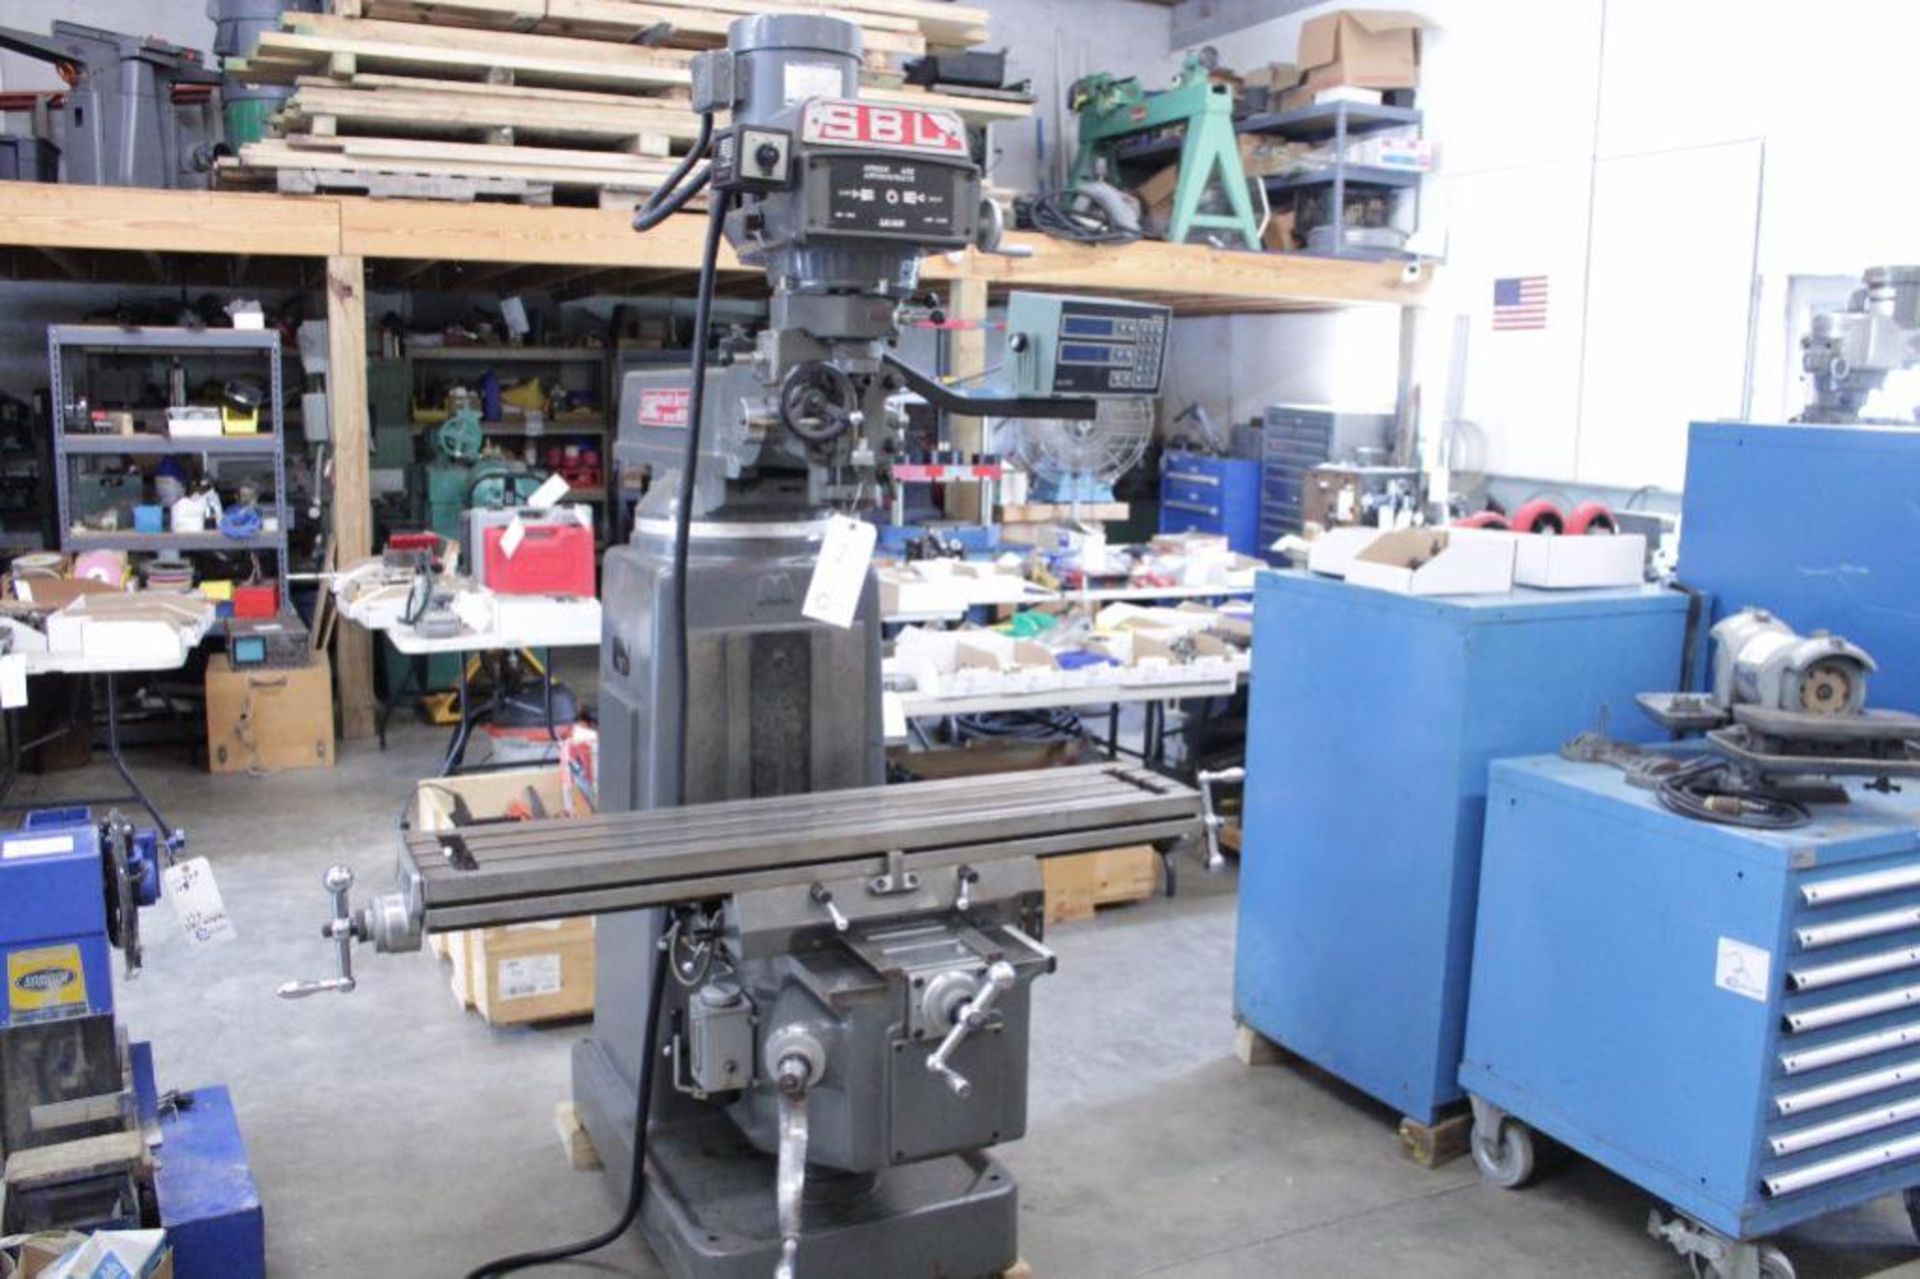 South Bend 3VH Vertical Milling Machine (missing Parts)